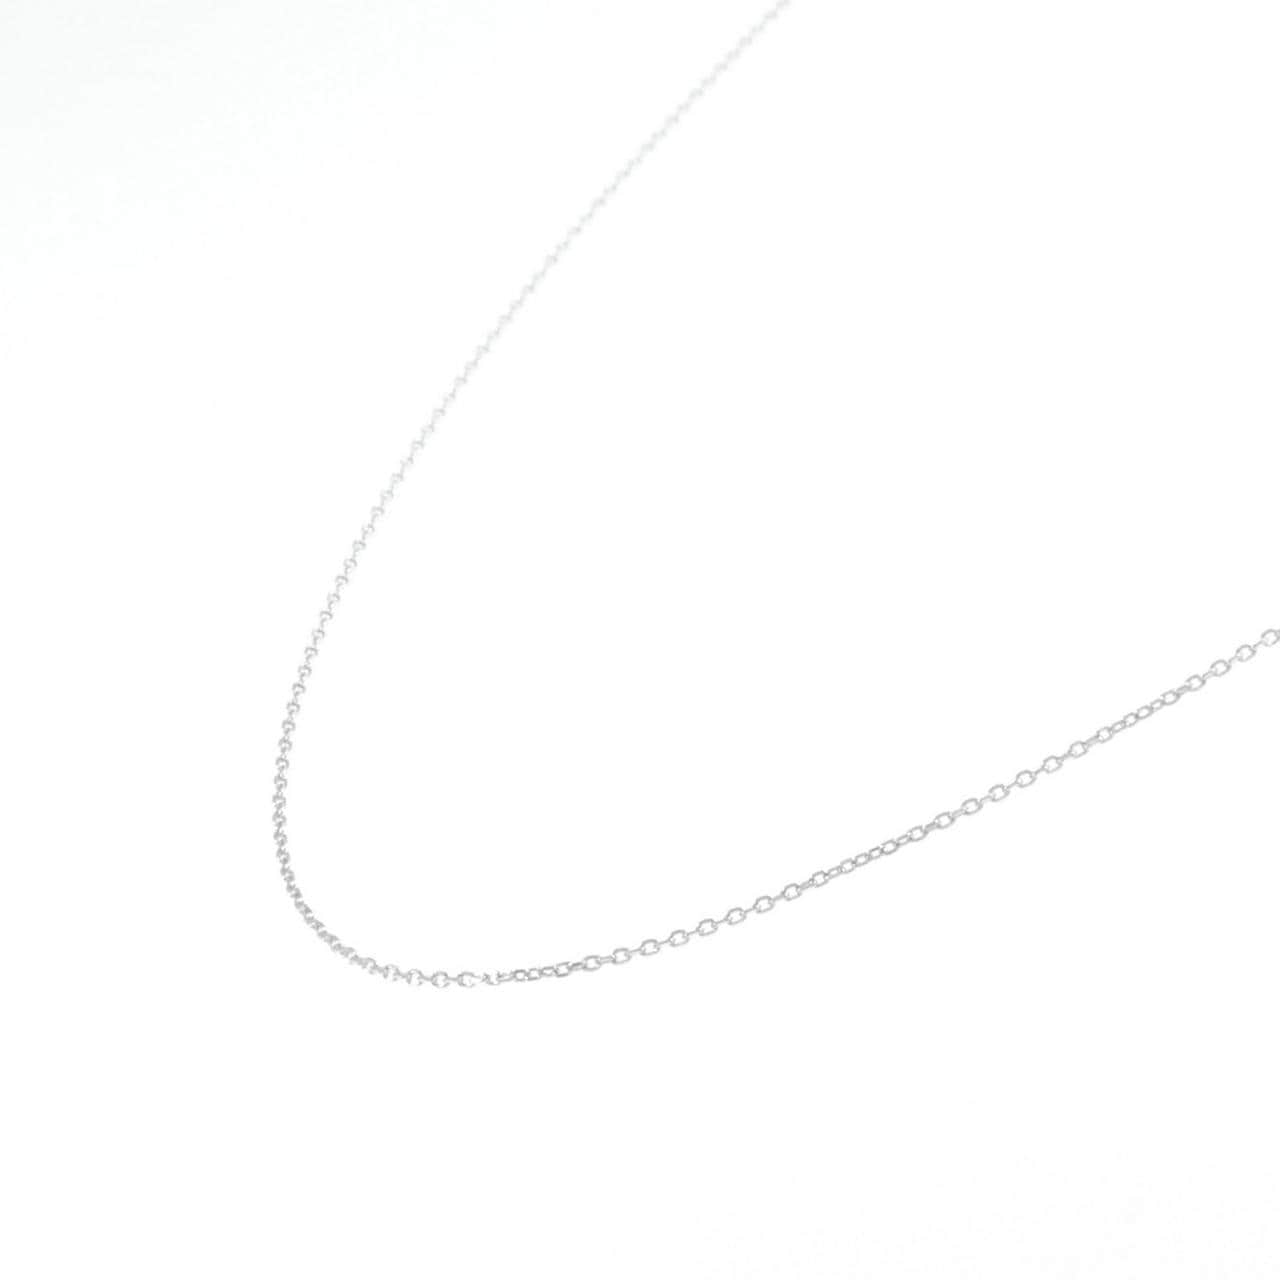 K18WG chain necklace